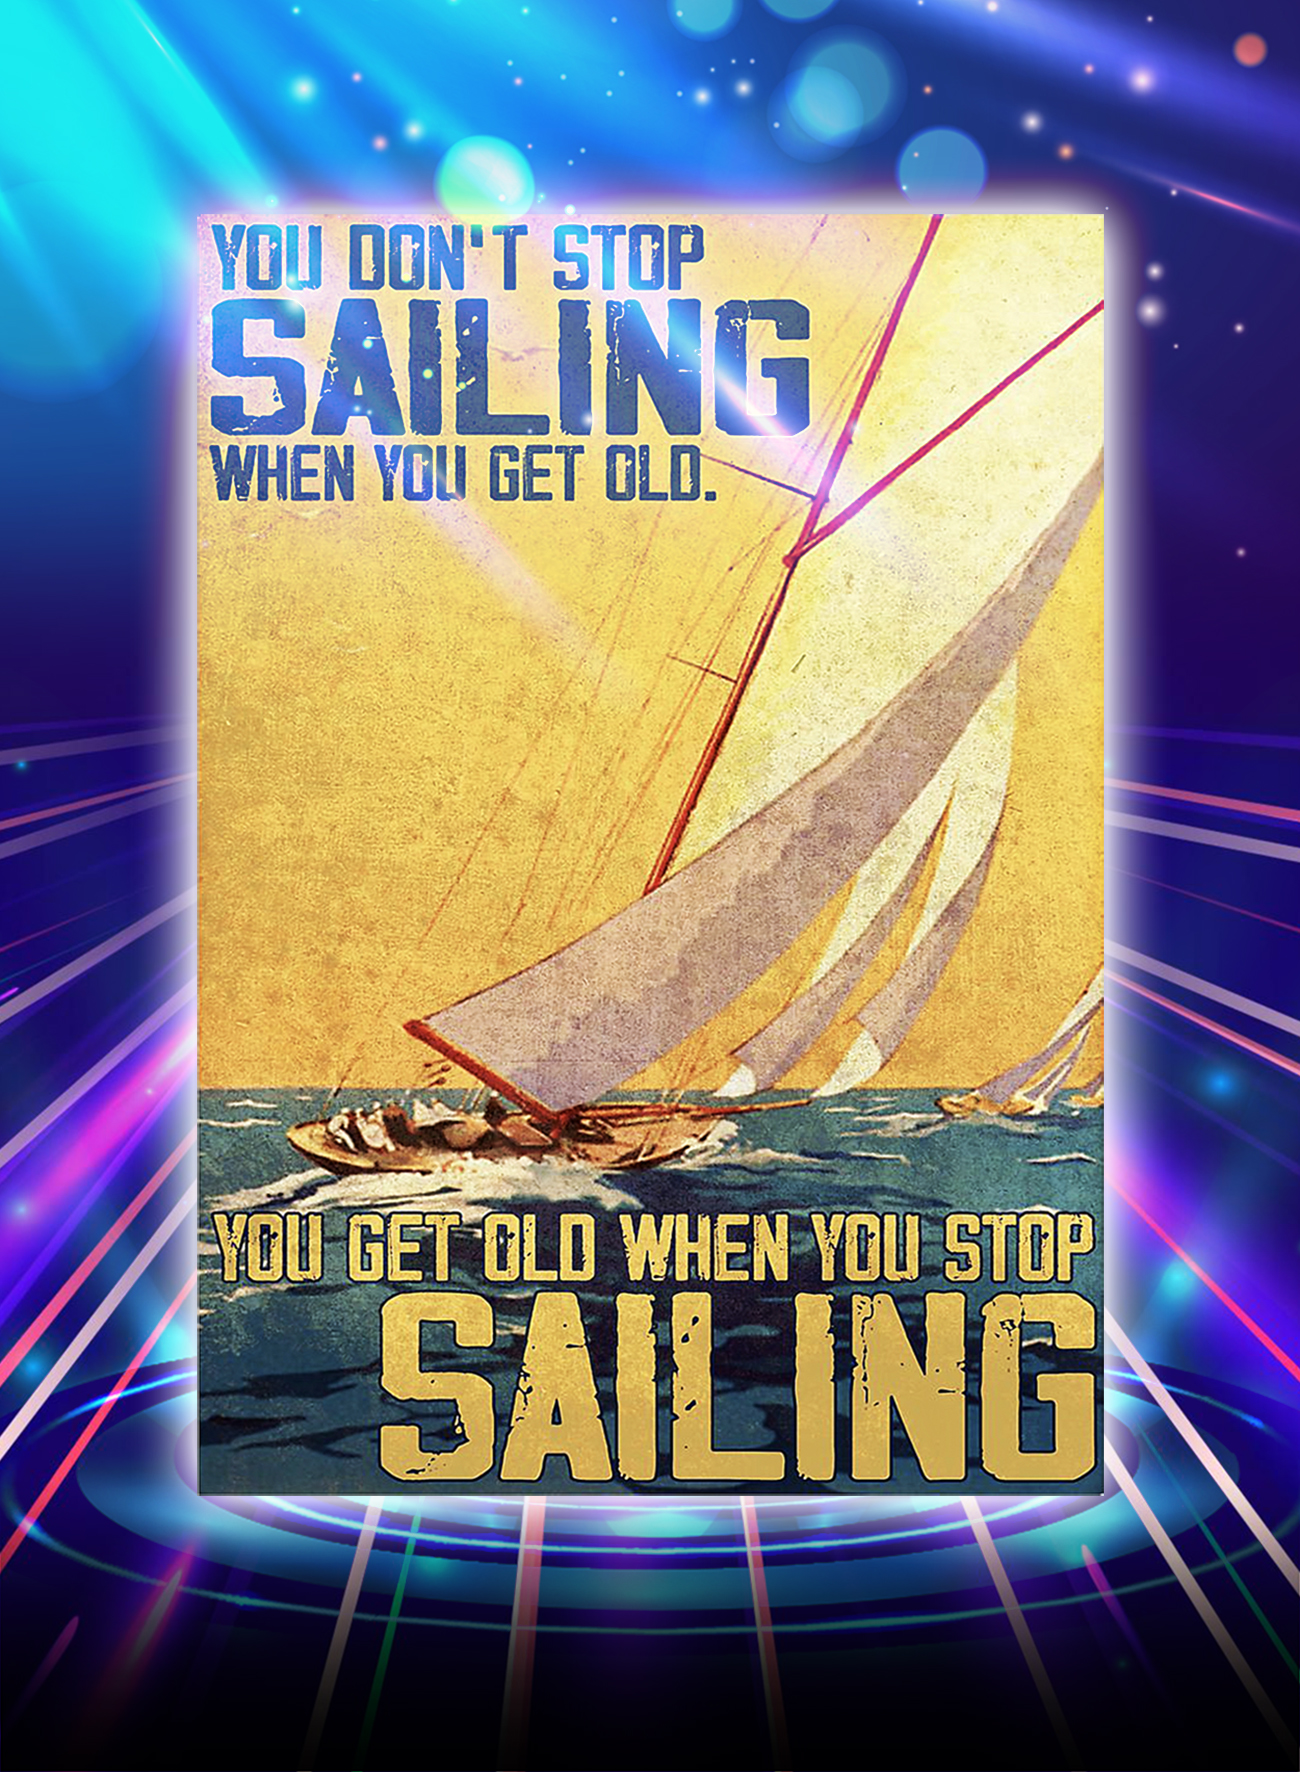 You don't stop sailing when you get old you get old when you stop sailing poster - A1